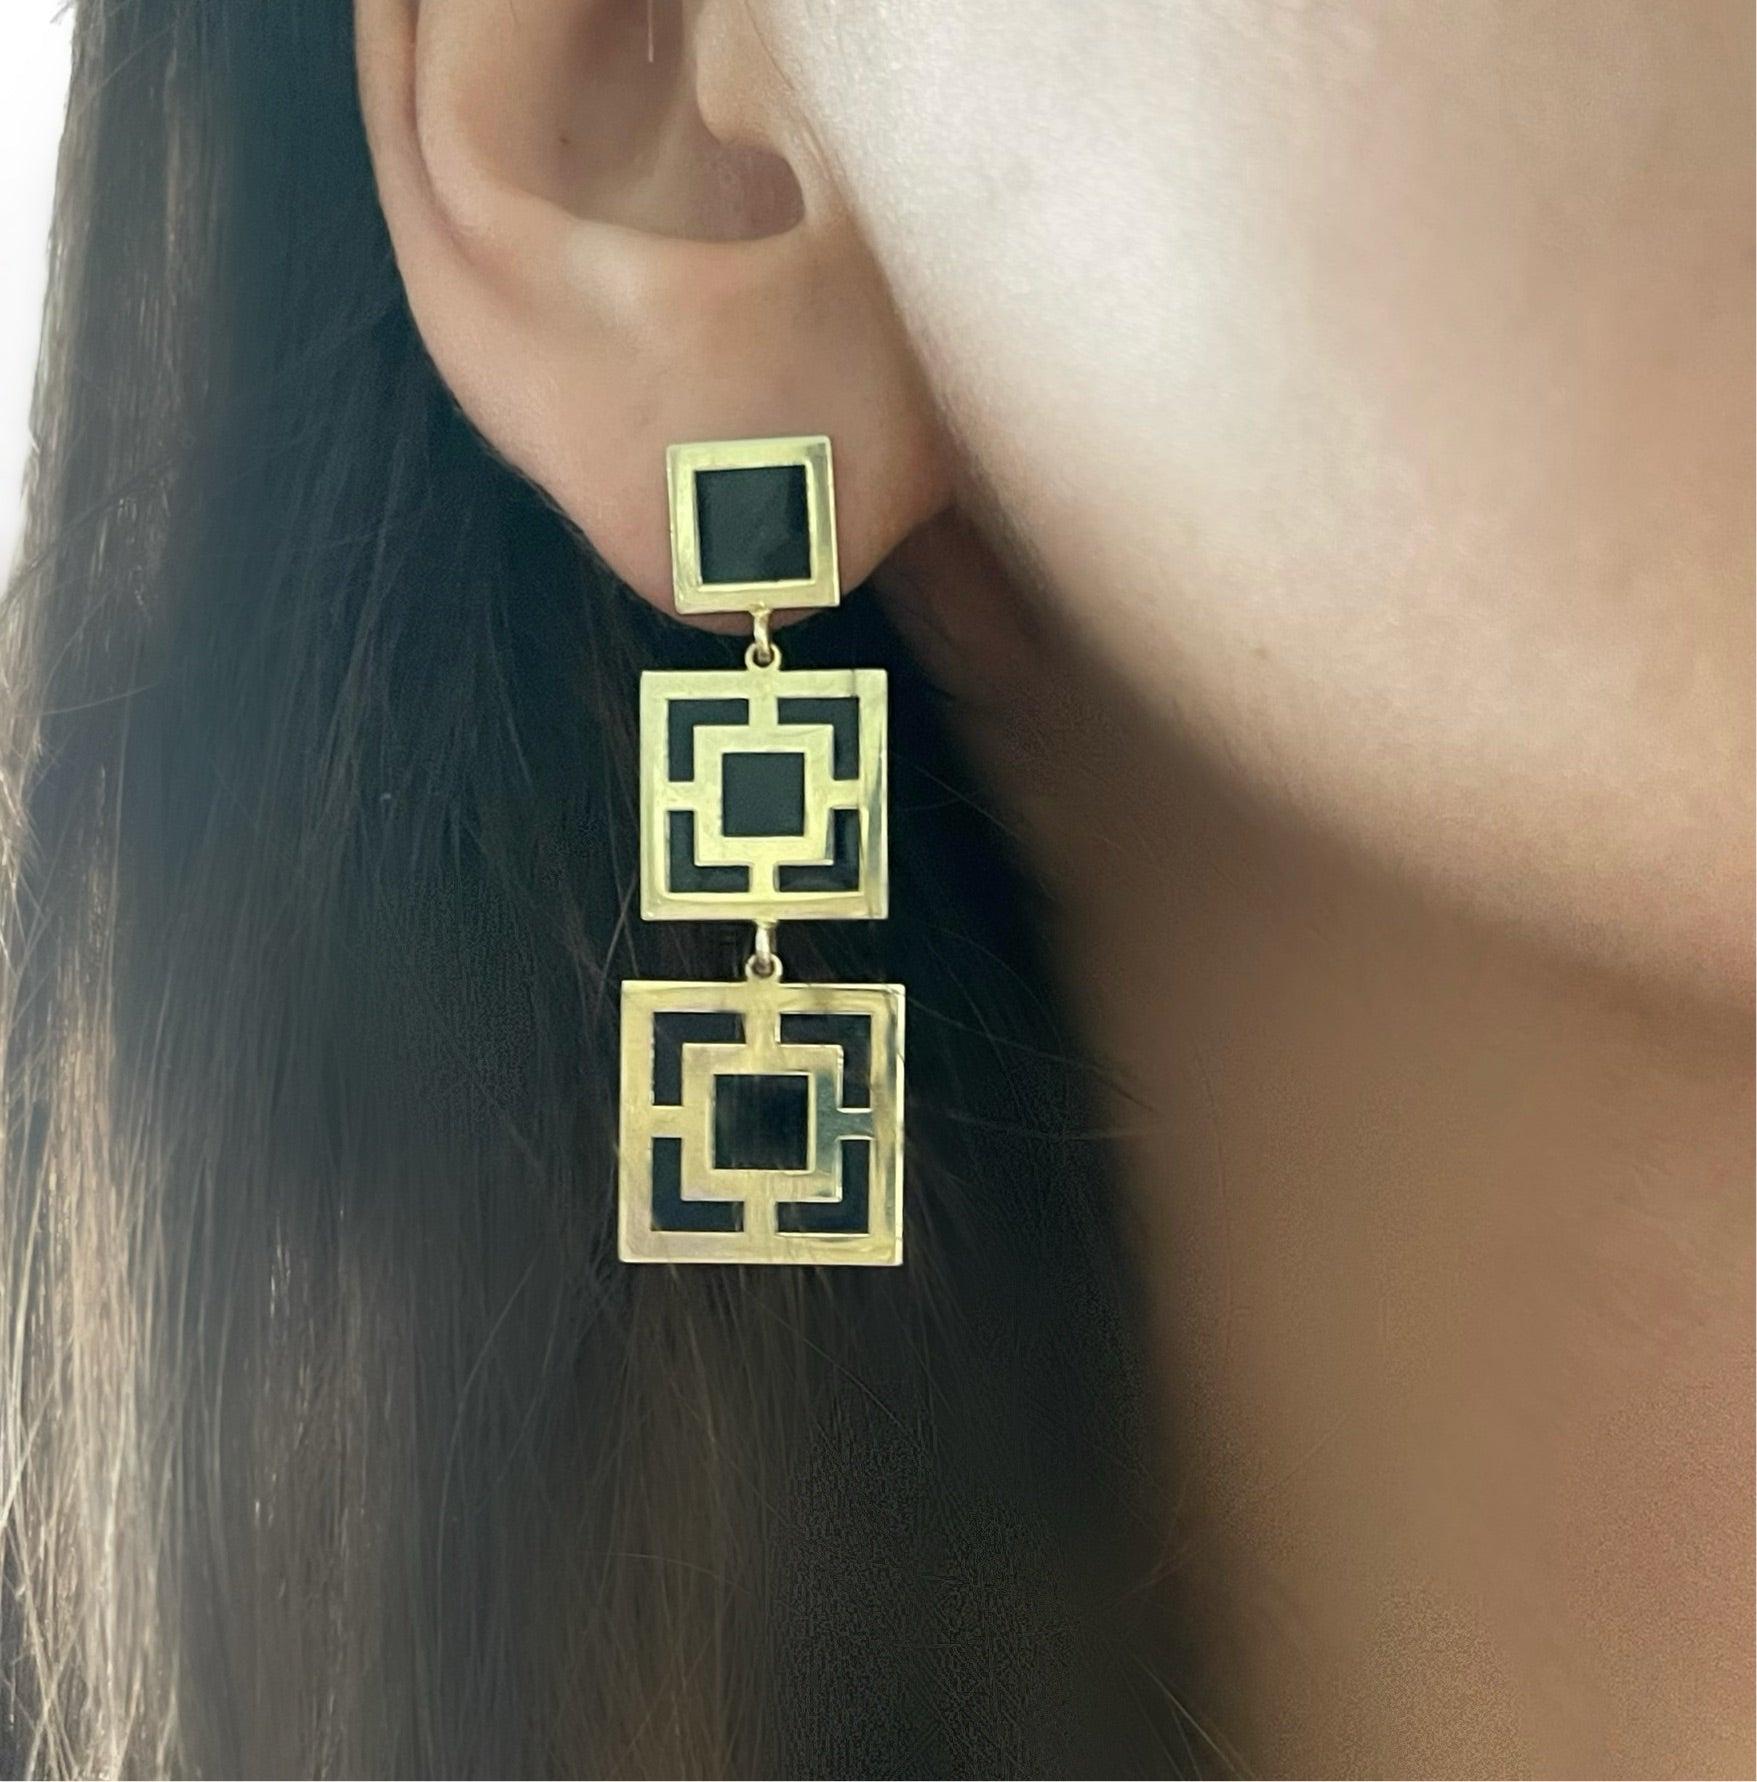 Classic, Modern, Geometric with a bit of Art Deco character these earrings are Inspired by Helen of Troy known globally for her beauty. Your choice of earrings for intimate dinners and special events that you will keep for a lifetime.

These